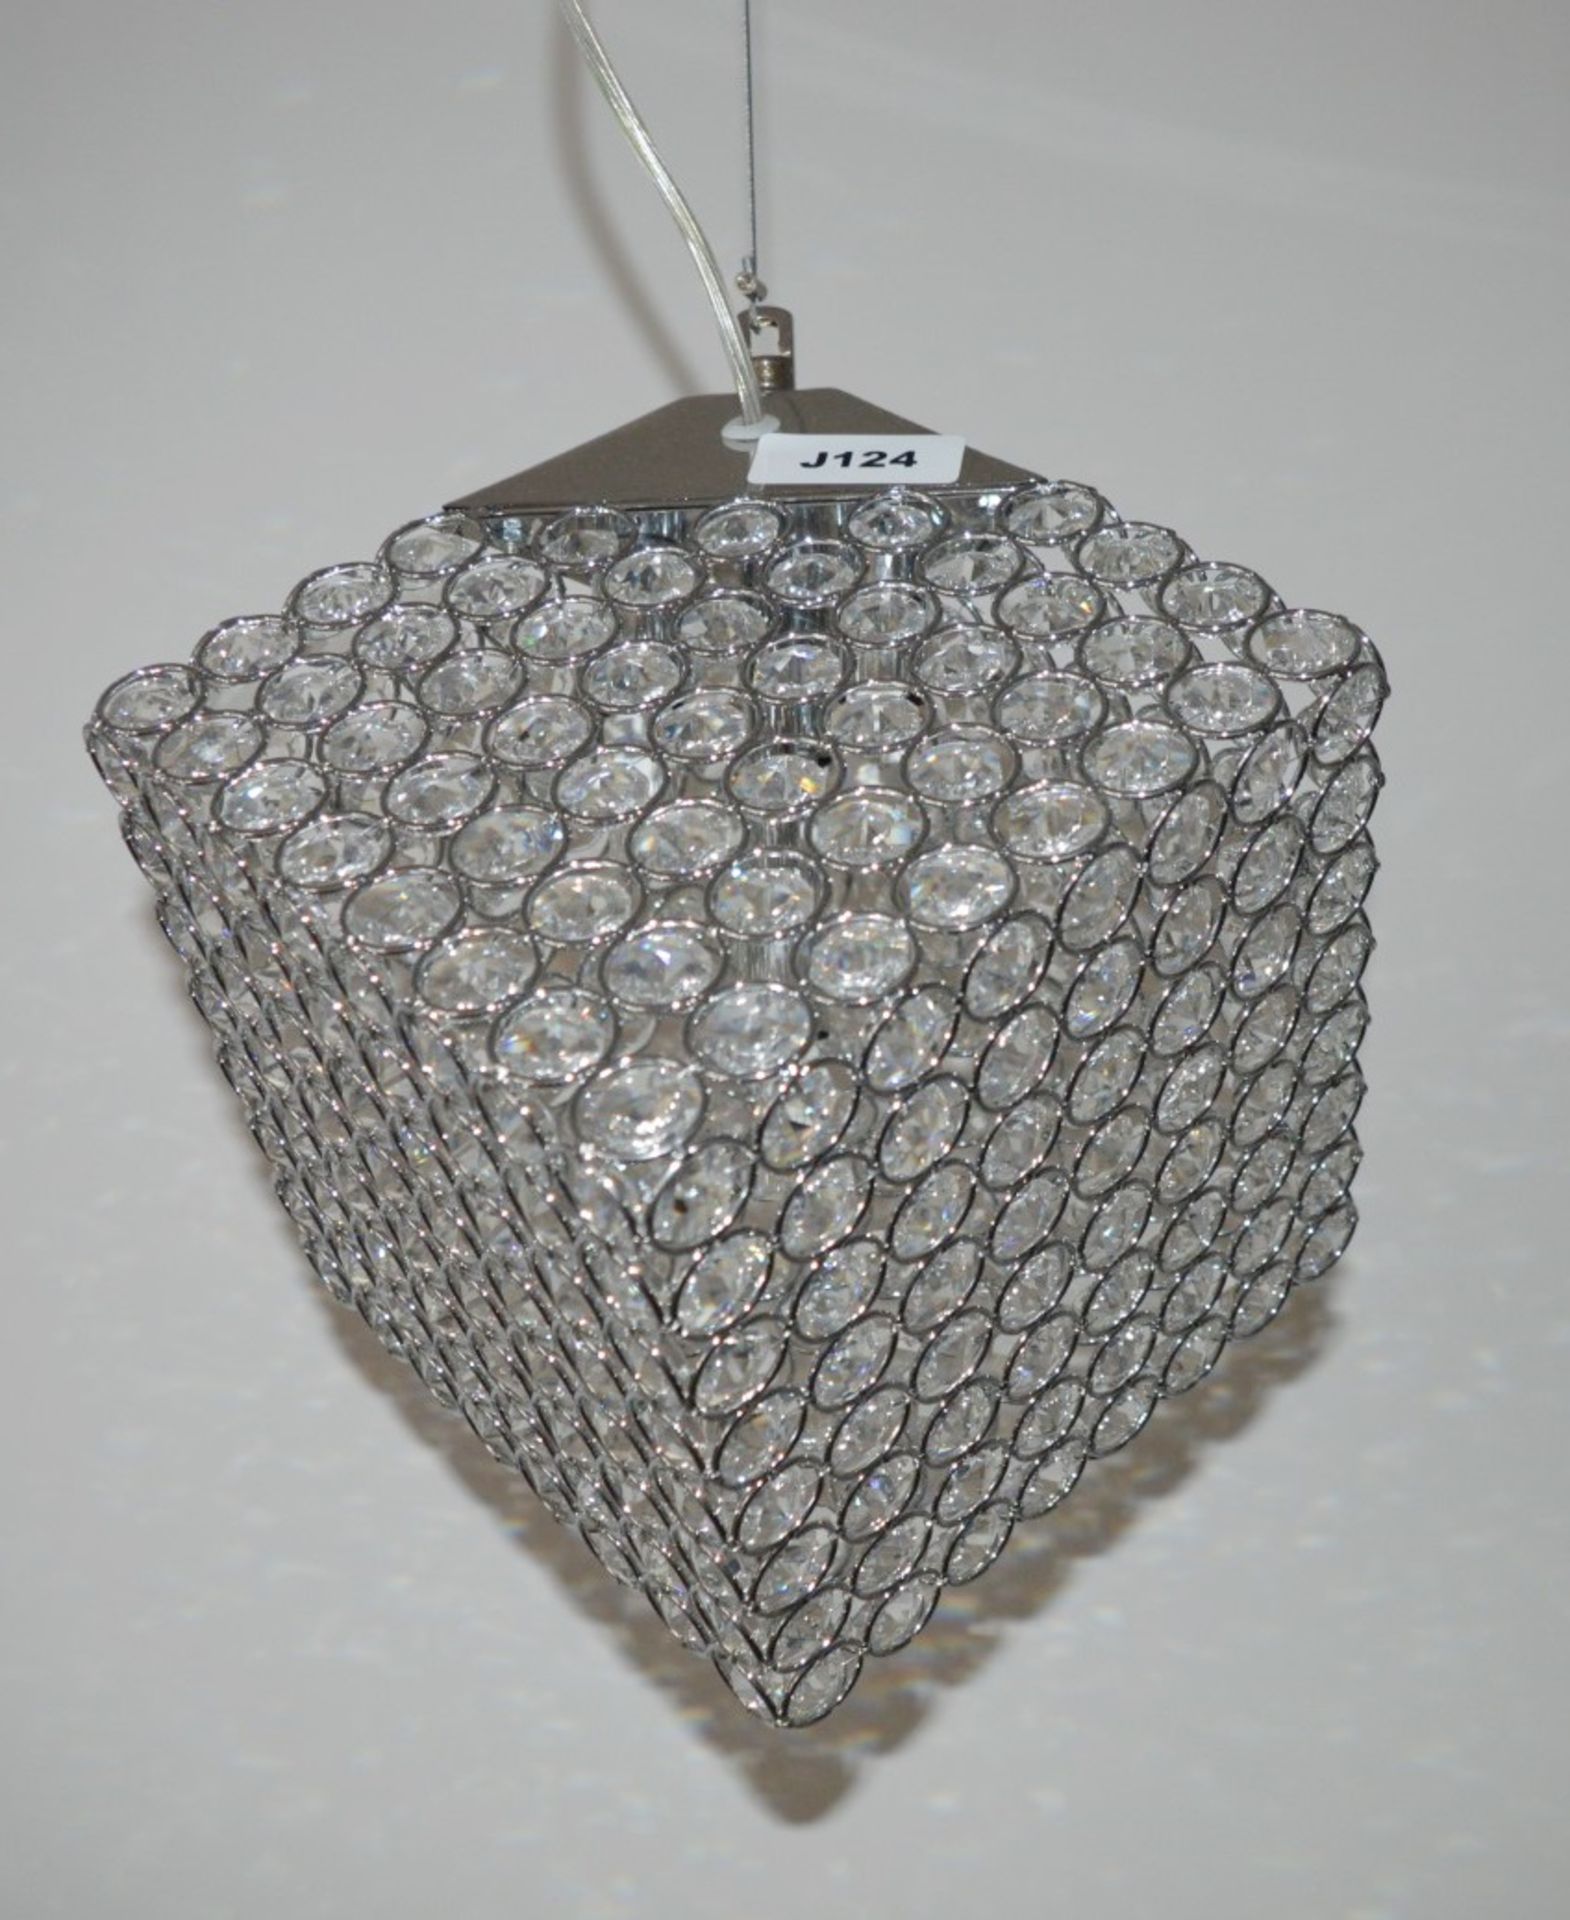 1 x Pendant 4-Light Ceiling Light With Clear Crystal Button Inserts - Chrome Finish - RRP £237.60 - Image 5 of 5